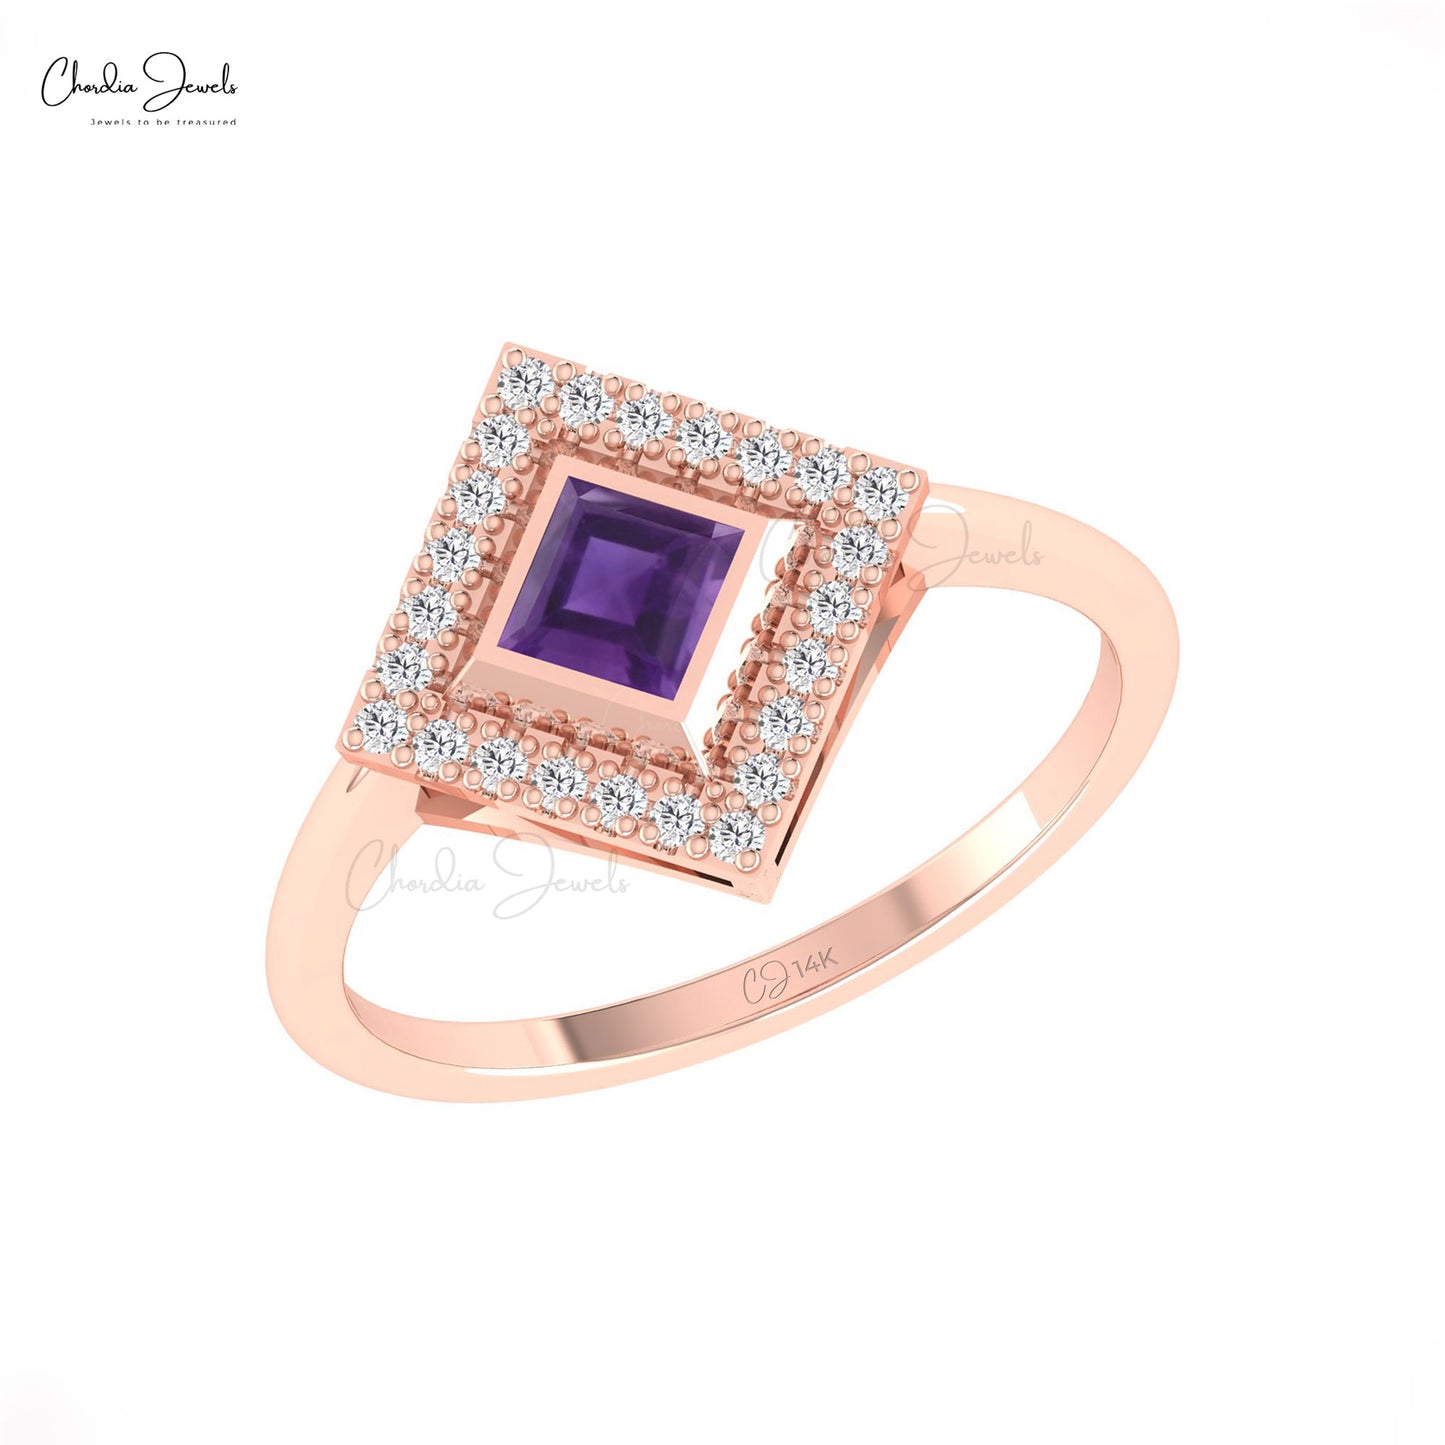 Load image into Gallery viewer, Exquisite 0.32ct Amethyst Gemstone Statement Ring 14k Solid Gold Diamond Halo Wedding Ring
